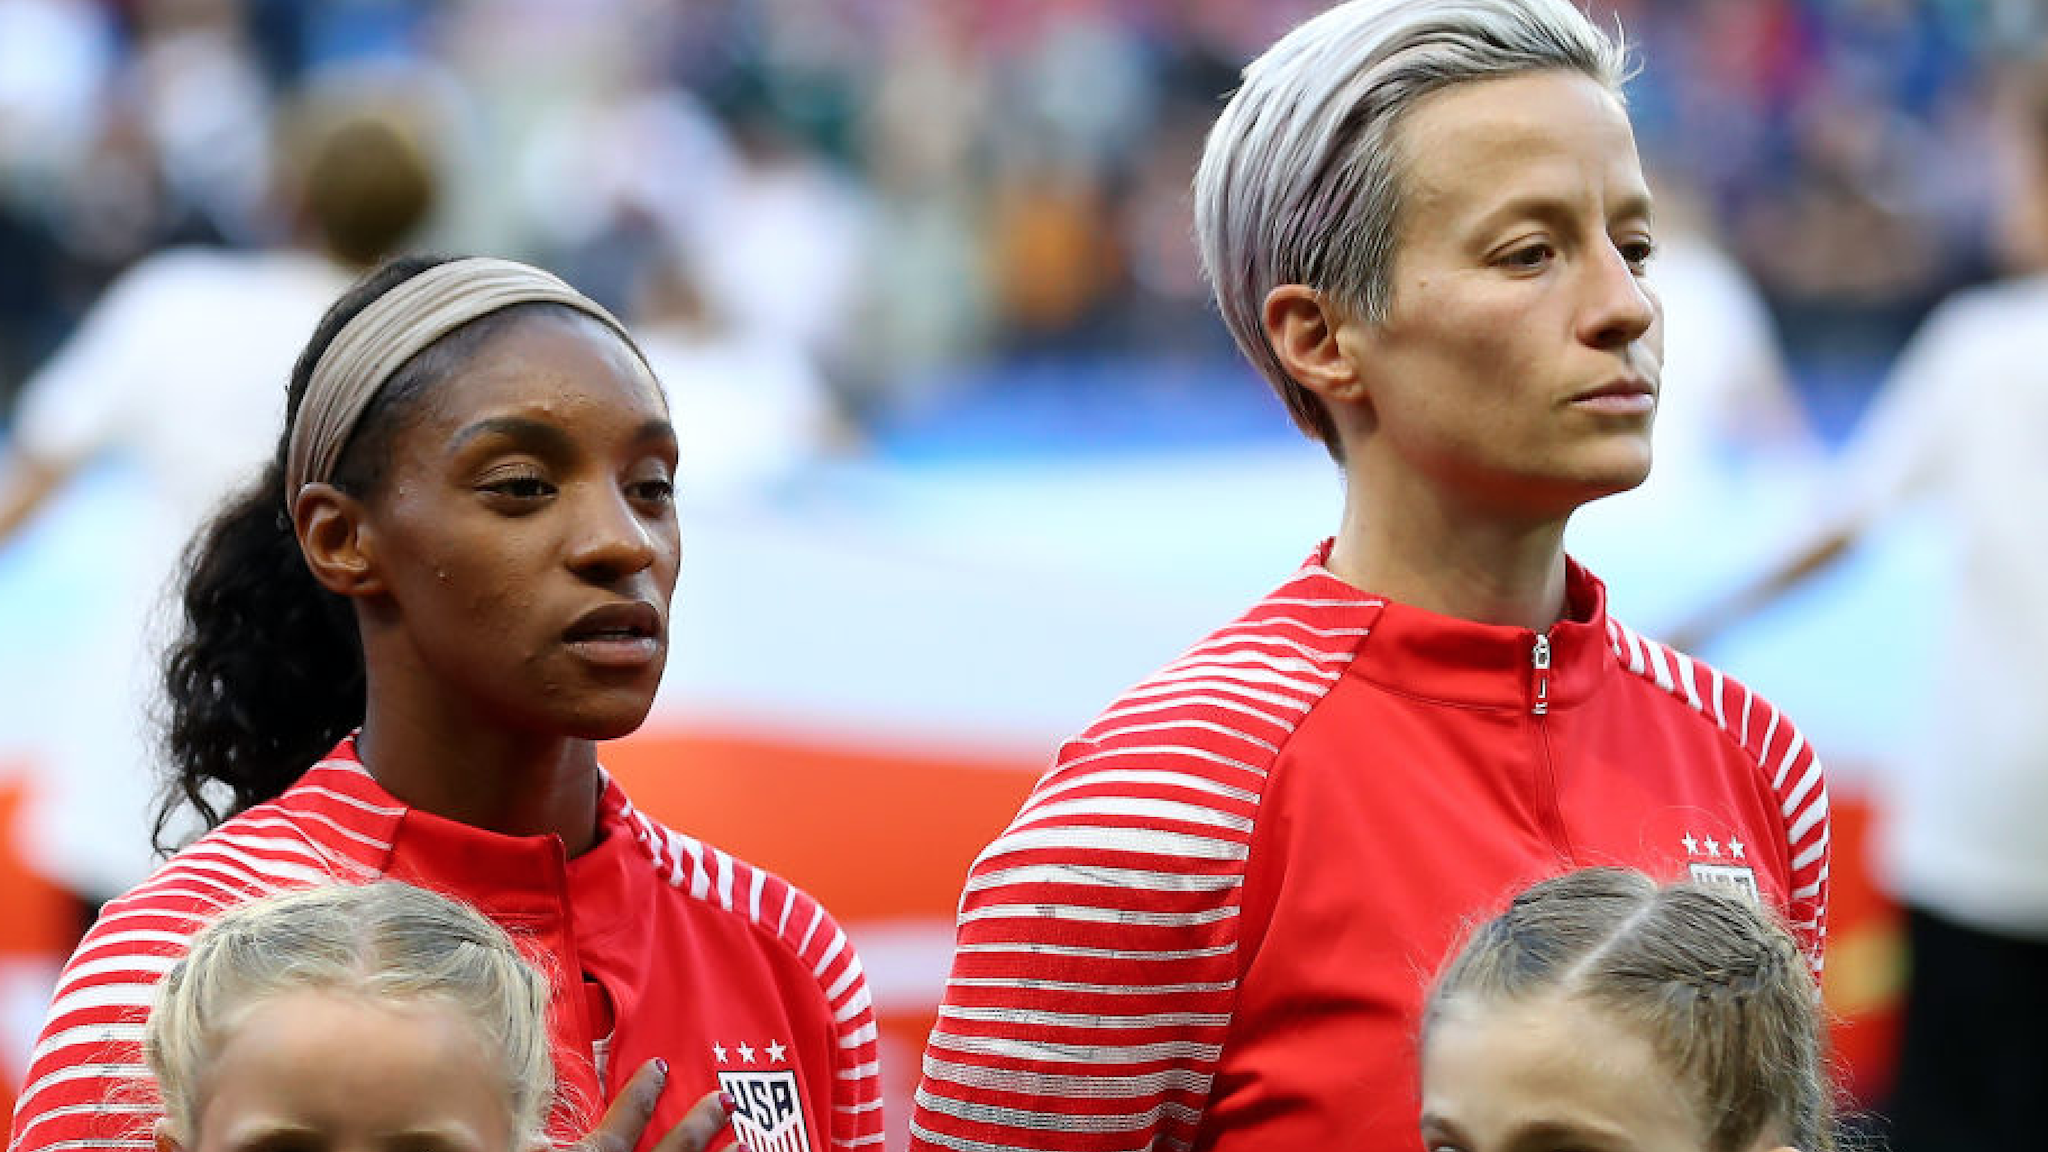 Megan Rapinoe of the USA refuses to sing the national anthem out of protest prior to the 2019 FIFA Women's World Cup France group F match between Sweden and USA at Stade Oceane on June 20, 2019 in Le Havre, France.